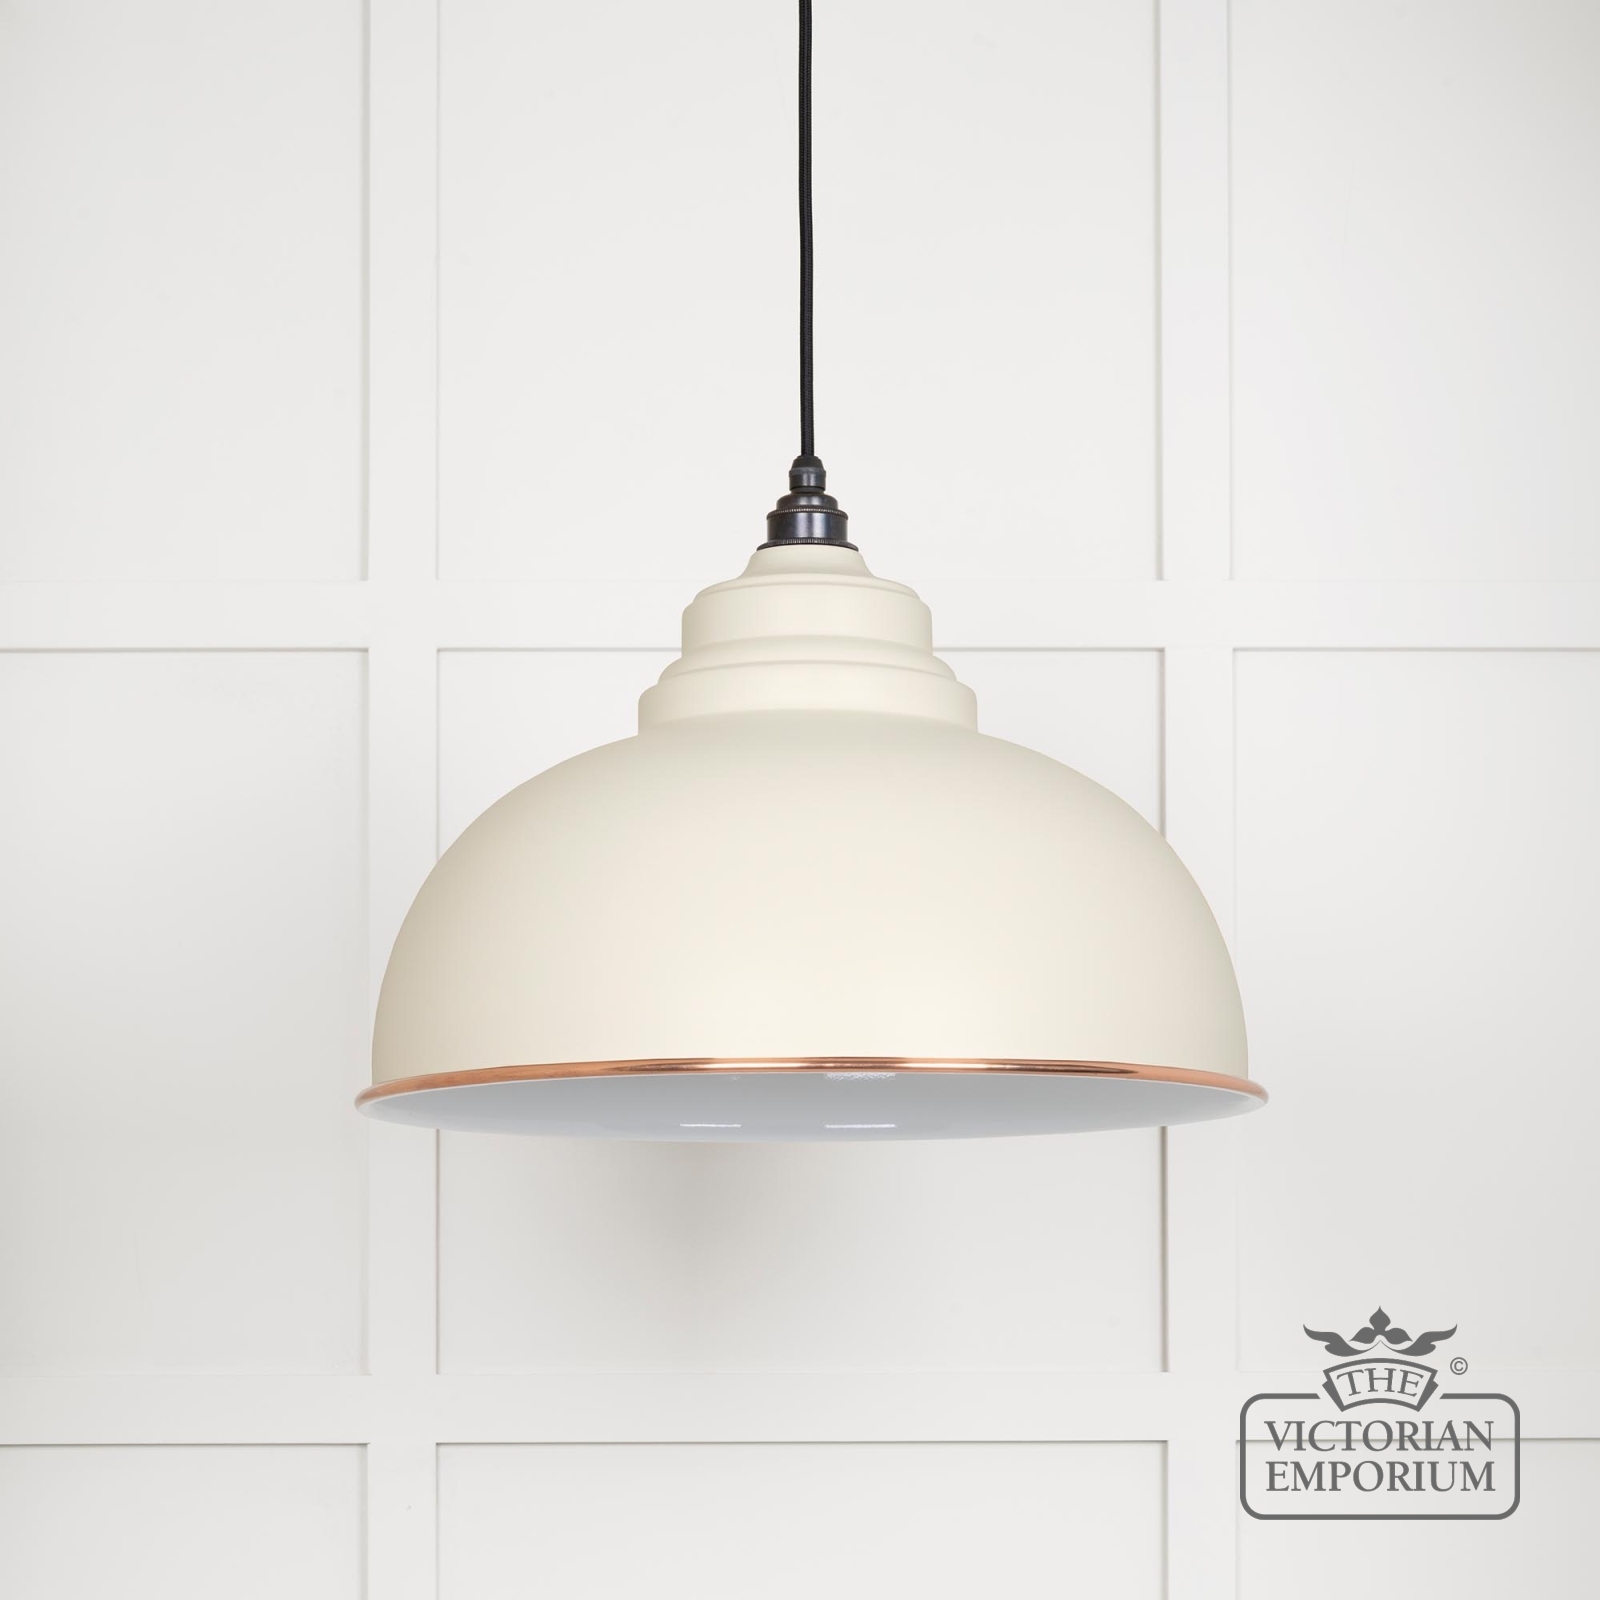 Harlow pendant light in Teasel with white gloss interior